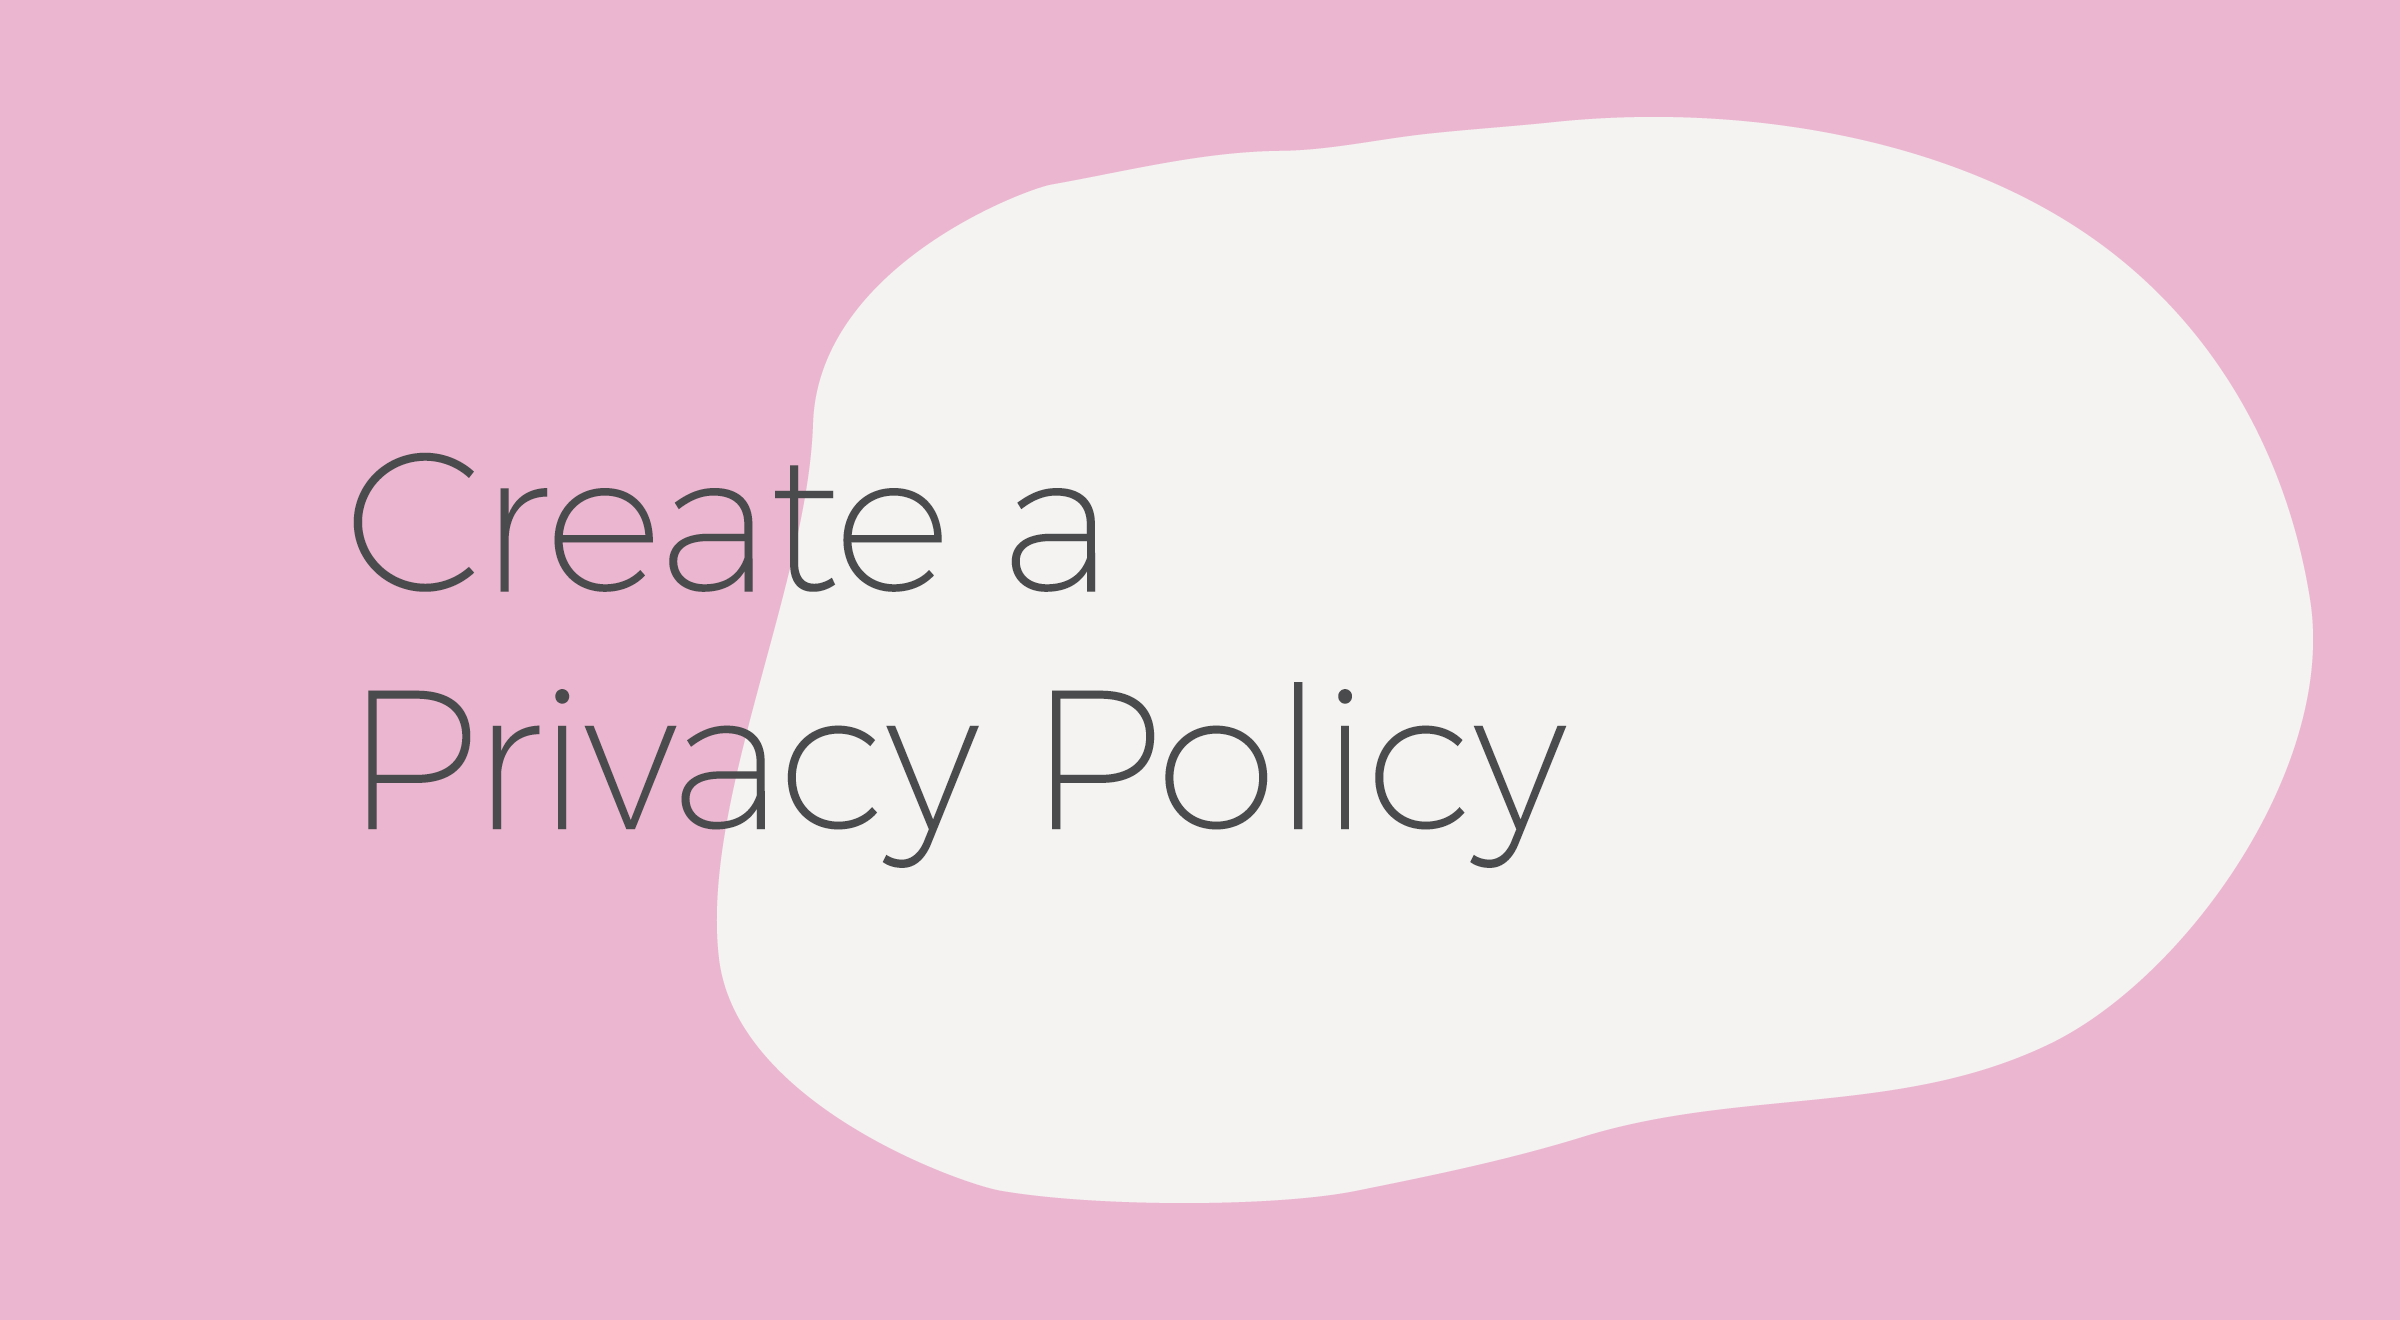 Create a Privacy Policy